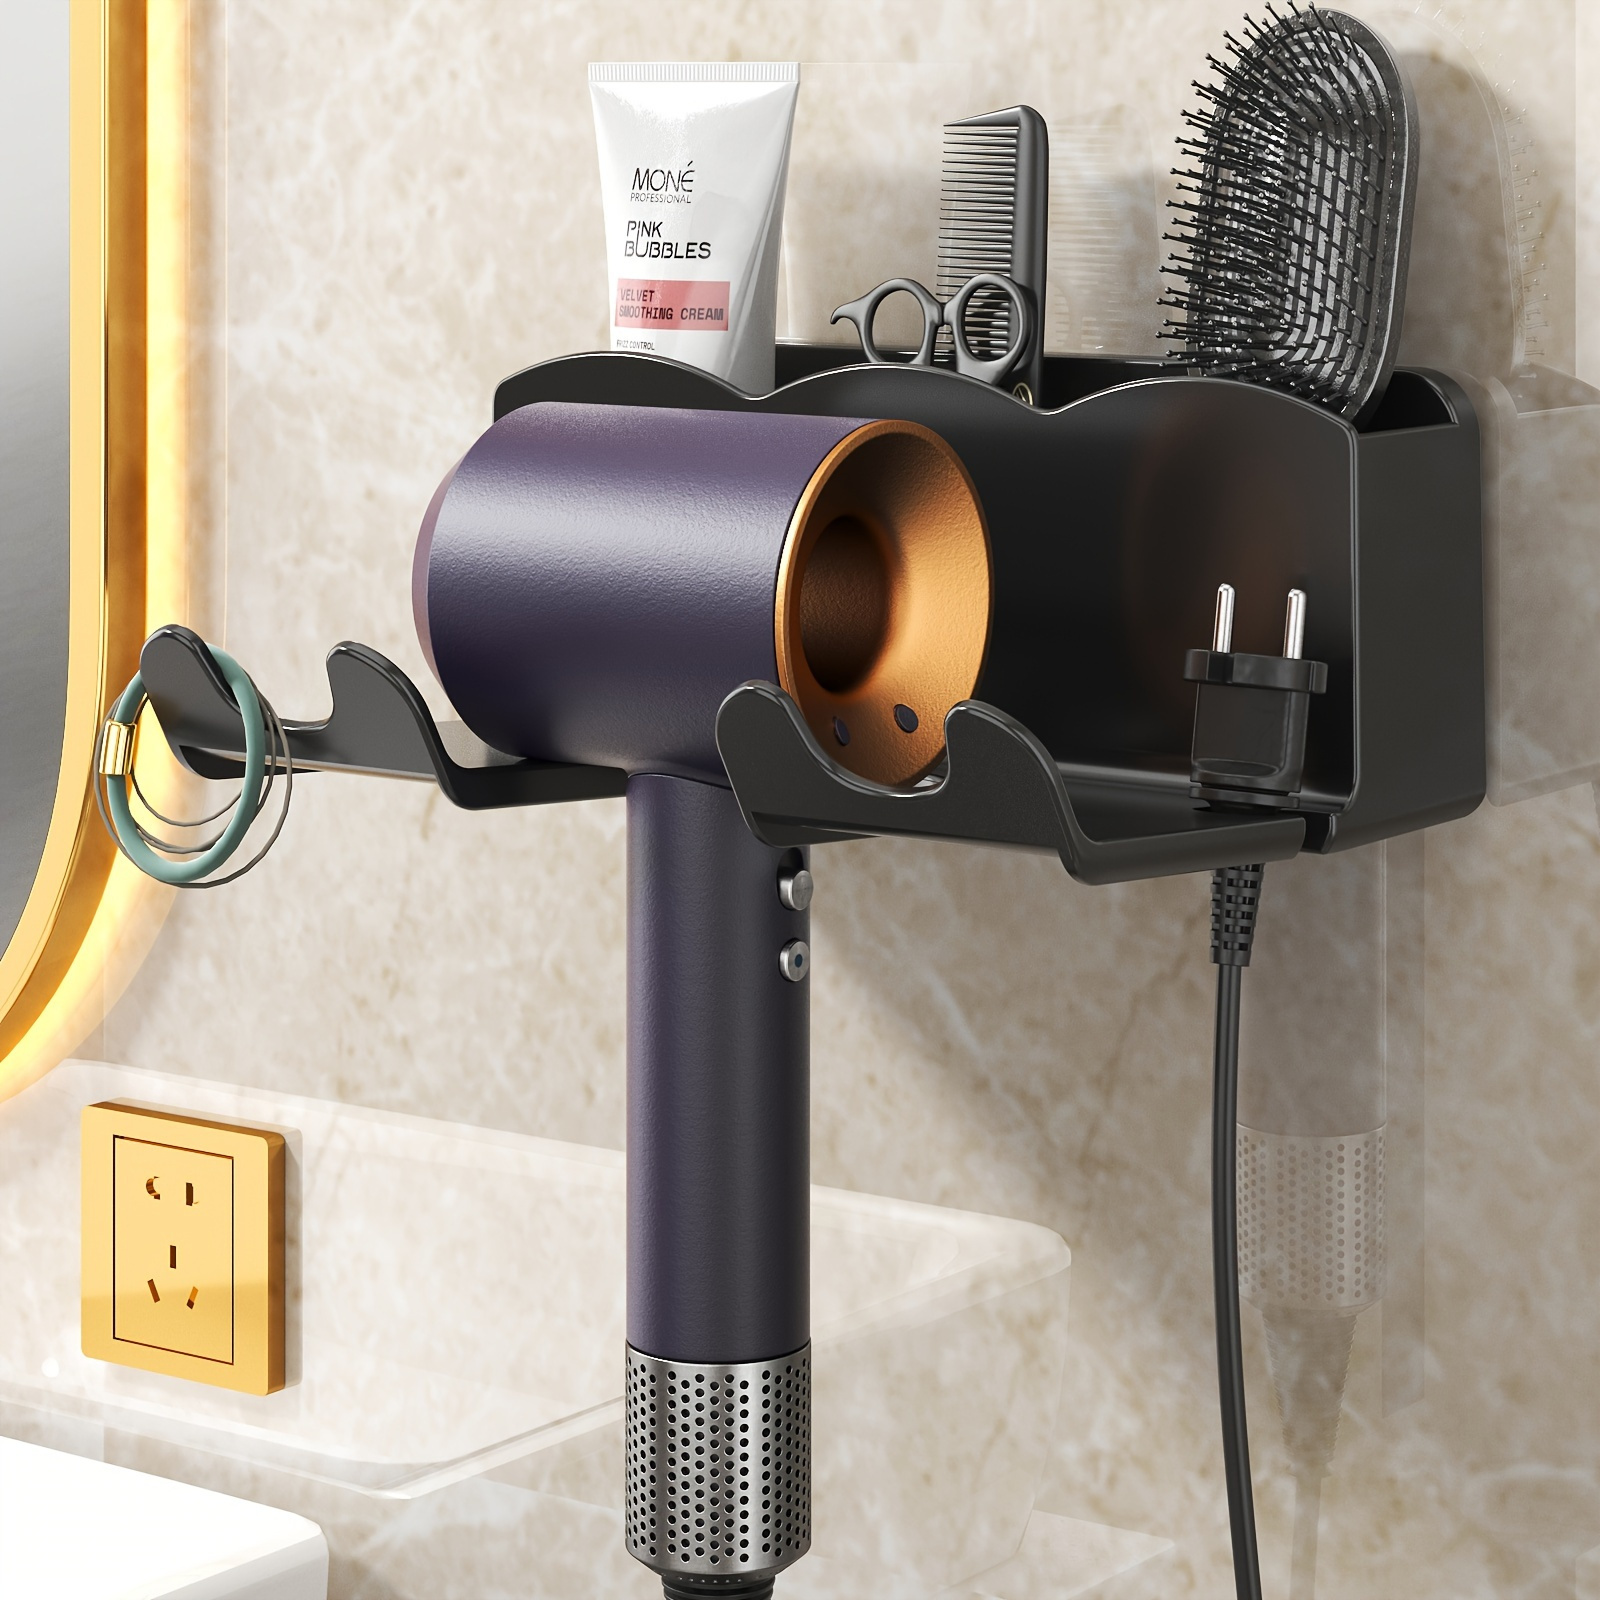 

Easy-install Hair Dryer Holder - Wall-mounted, No-drill Storage Rack For Bathrooms